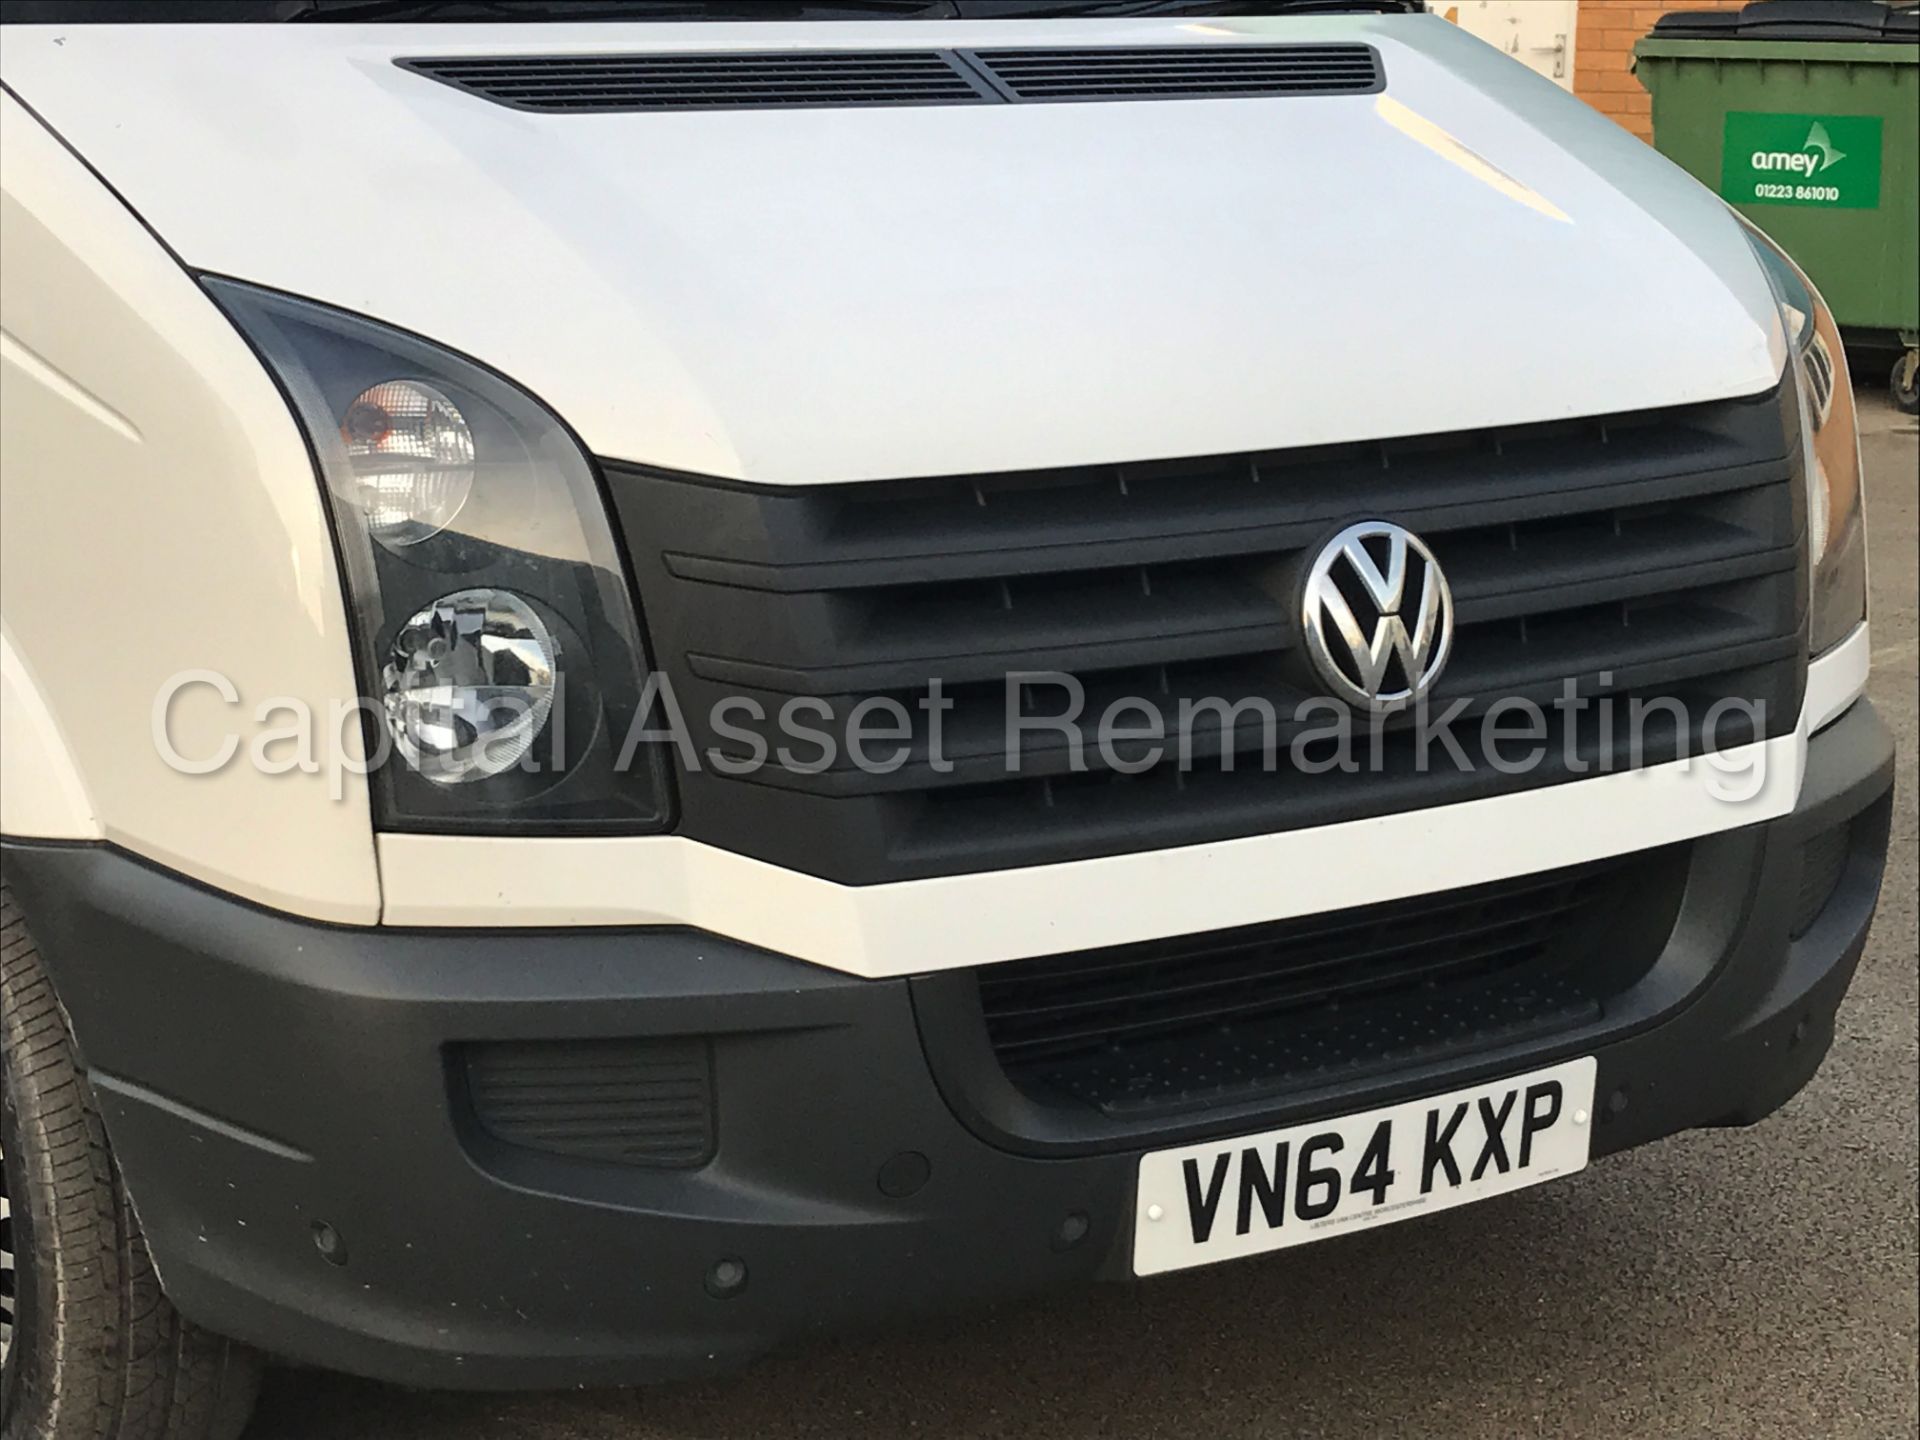 VOLKSWAGEN CRAFTER CR35 'LWB HI-ROOF' (2015 MODEL) '2.0 TDI - 163 PS - 6 SPEED' (1 COMPANY OWNER) - Image 10 of 23